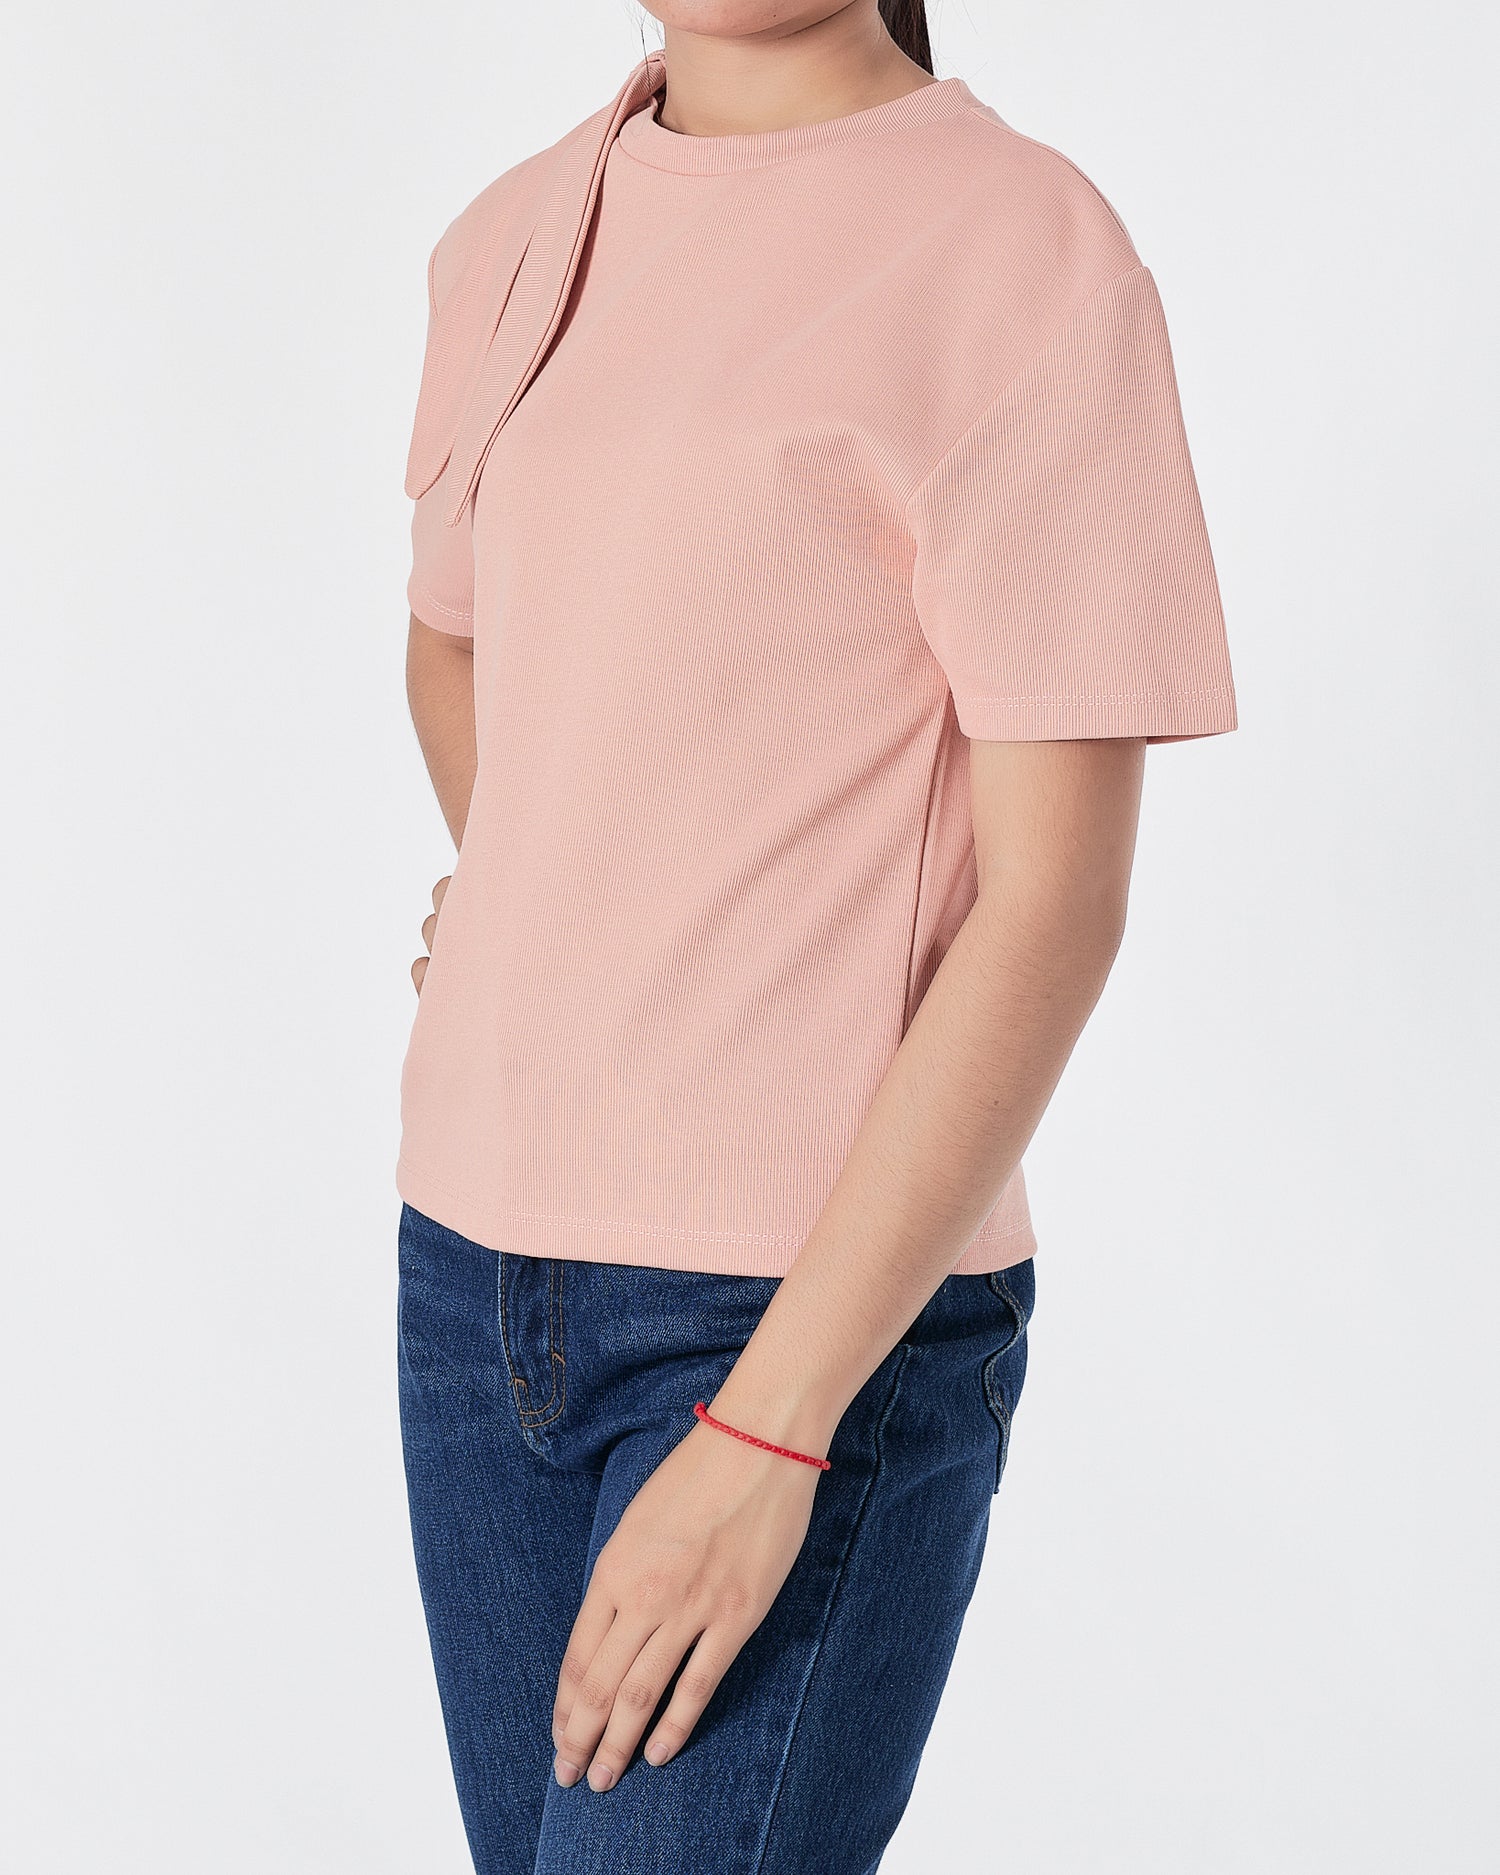 Tie Neck Pink Lady  T-Shirt 13.50